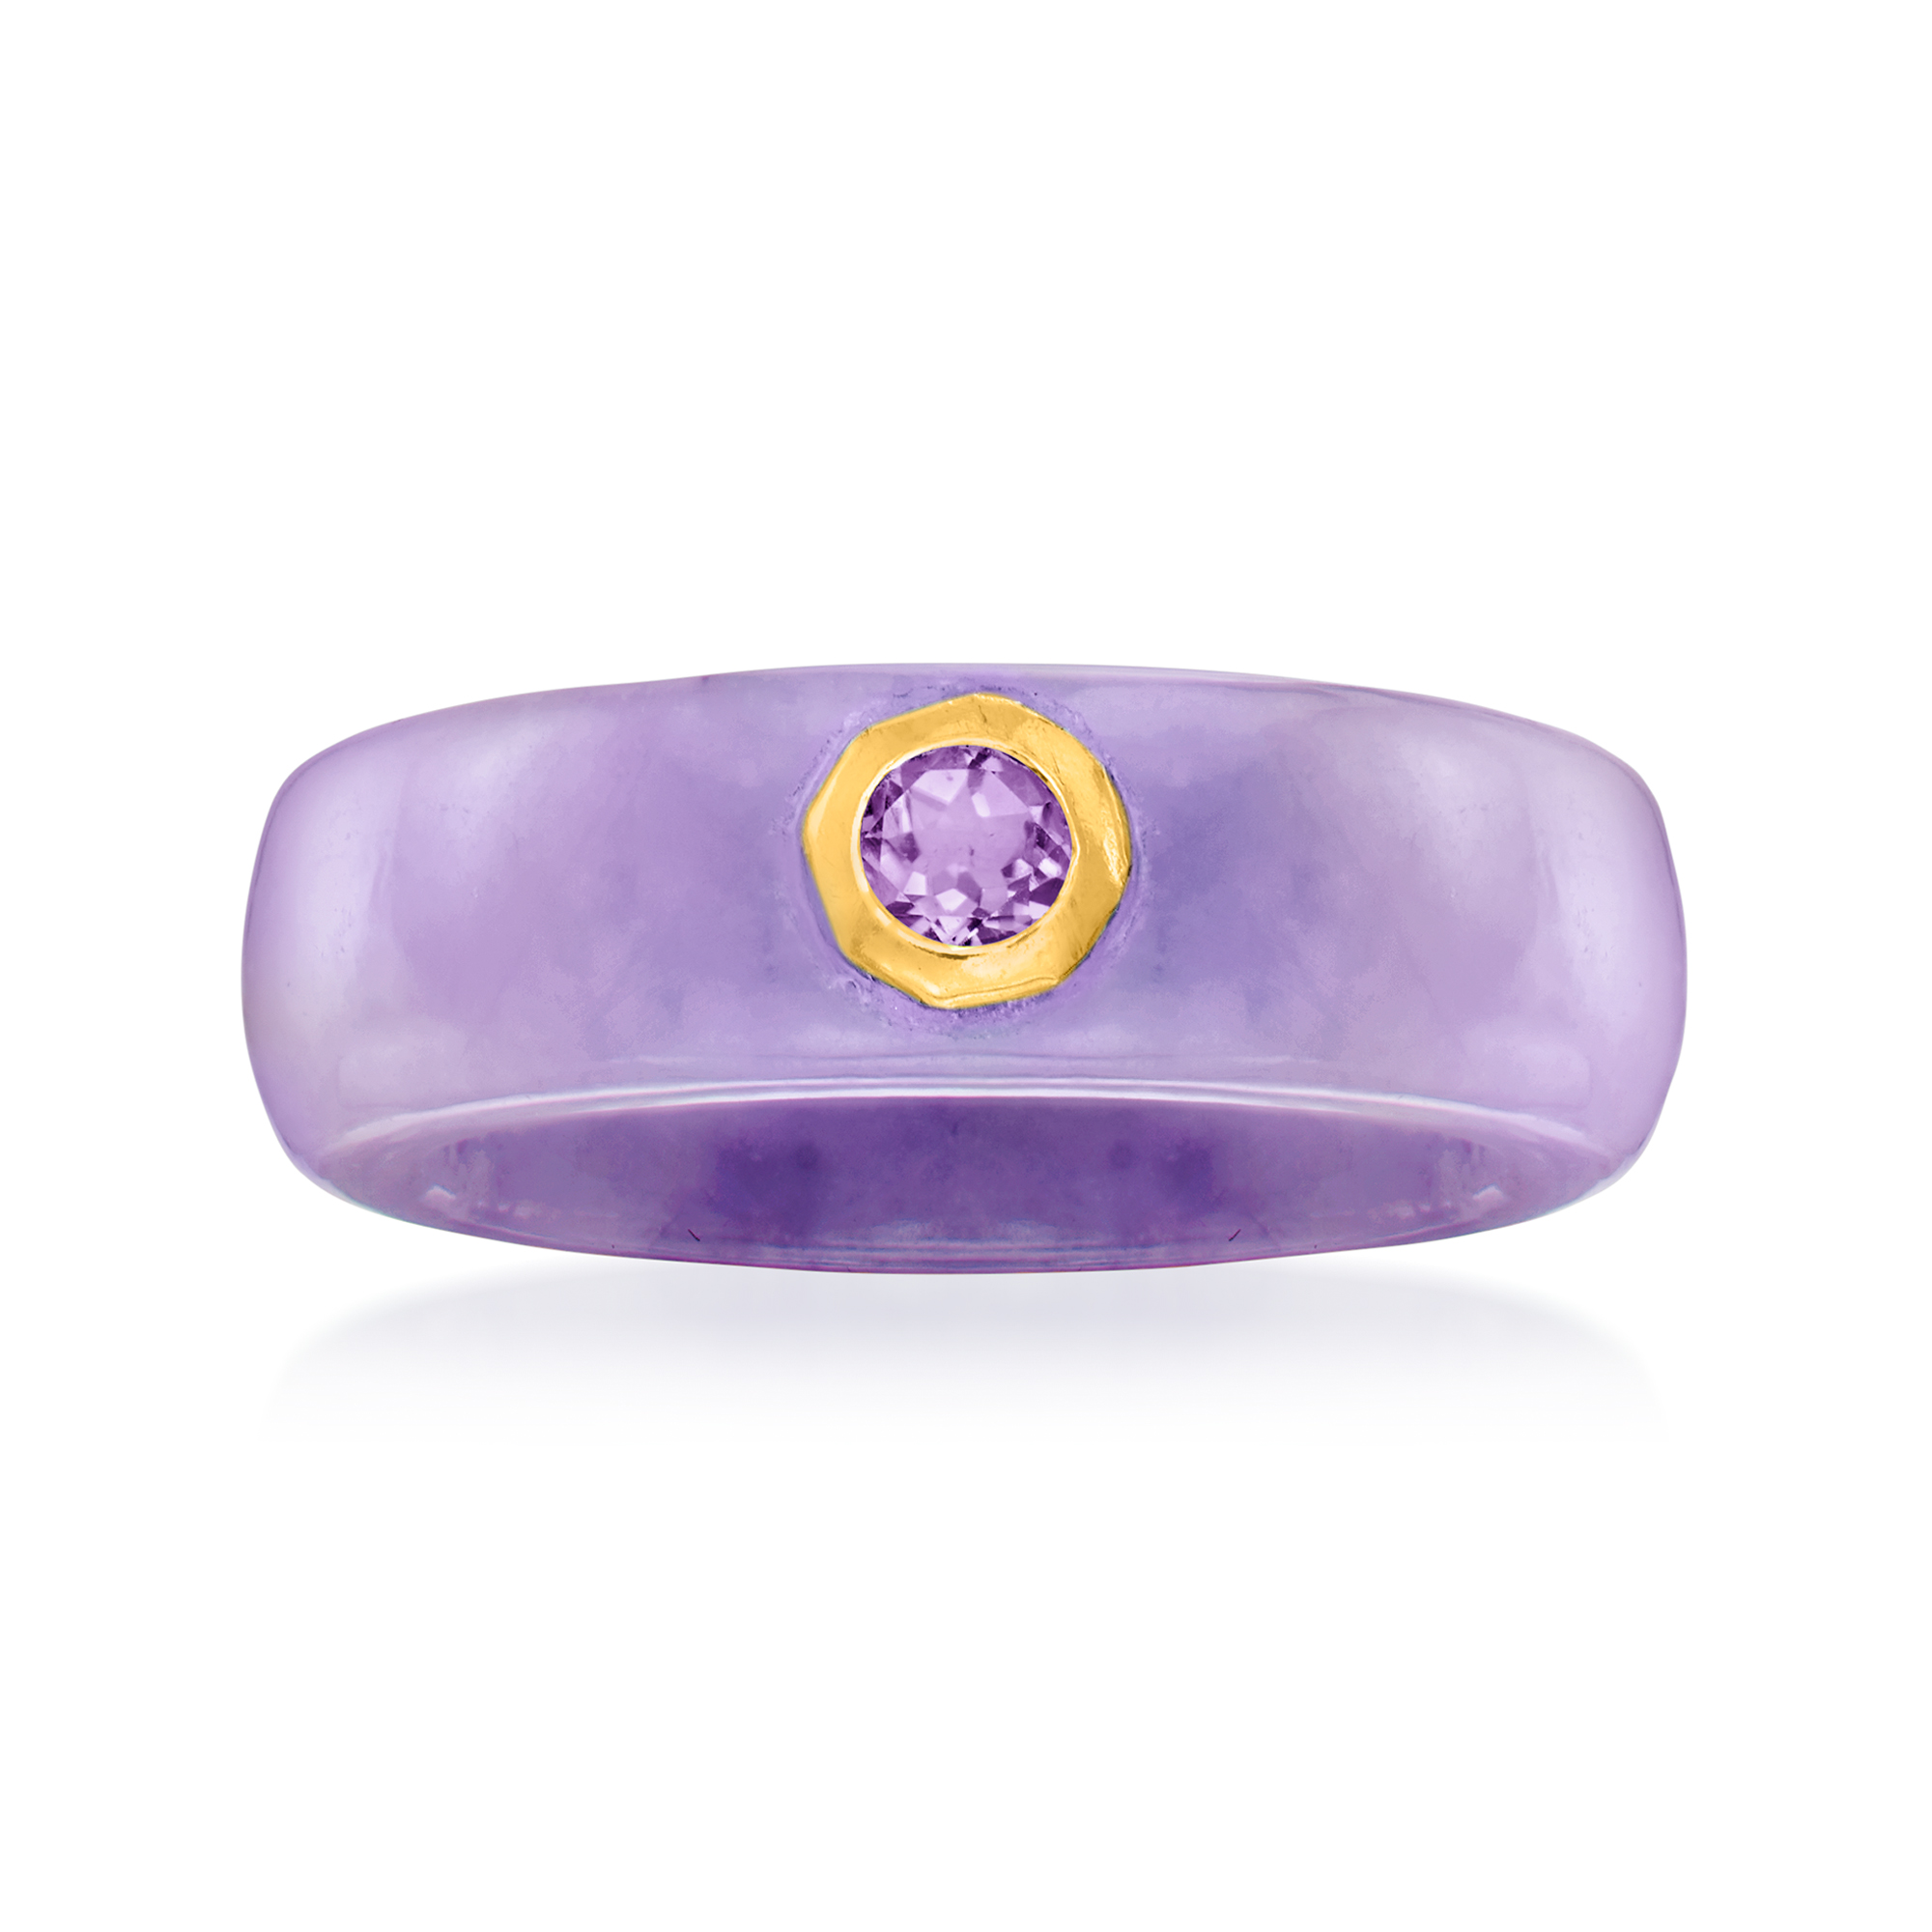 Ross-Simons Lavender Jade and .20 Carat Amethyst Ring With 14kt Gold – ASA  College: Florida